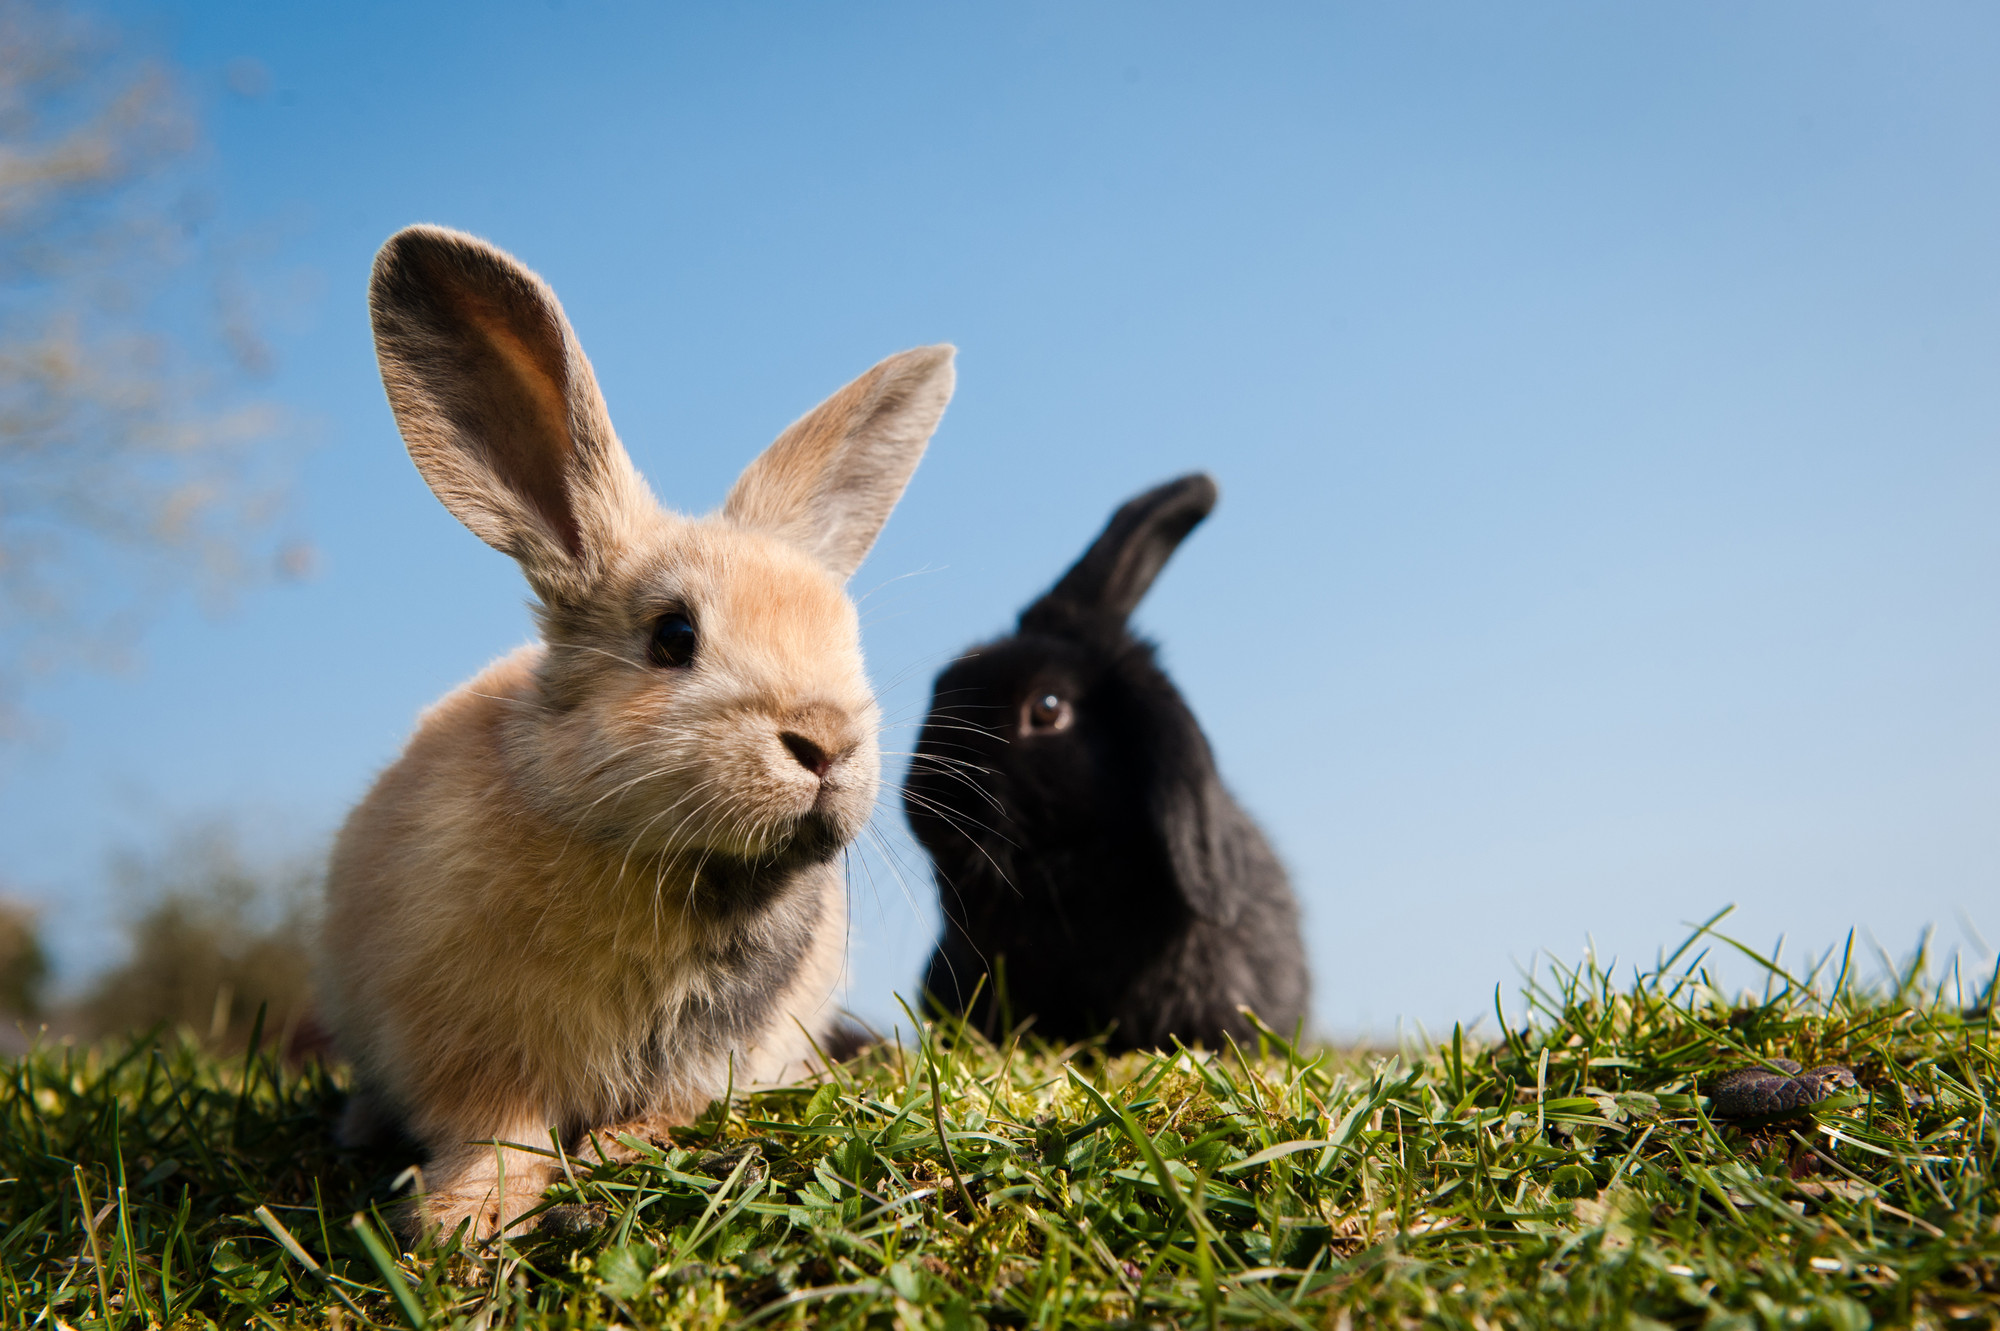 Rabbits Peanut and Brazil Nut from Burford rehoming centre